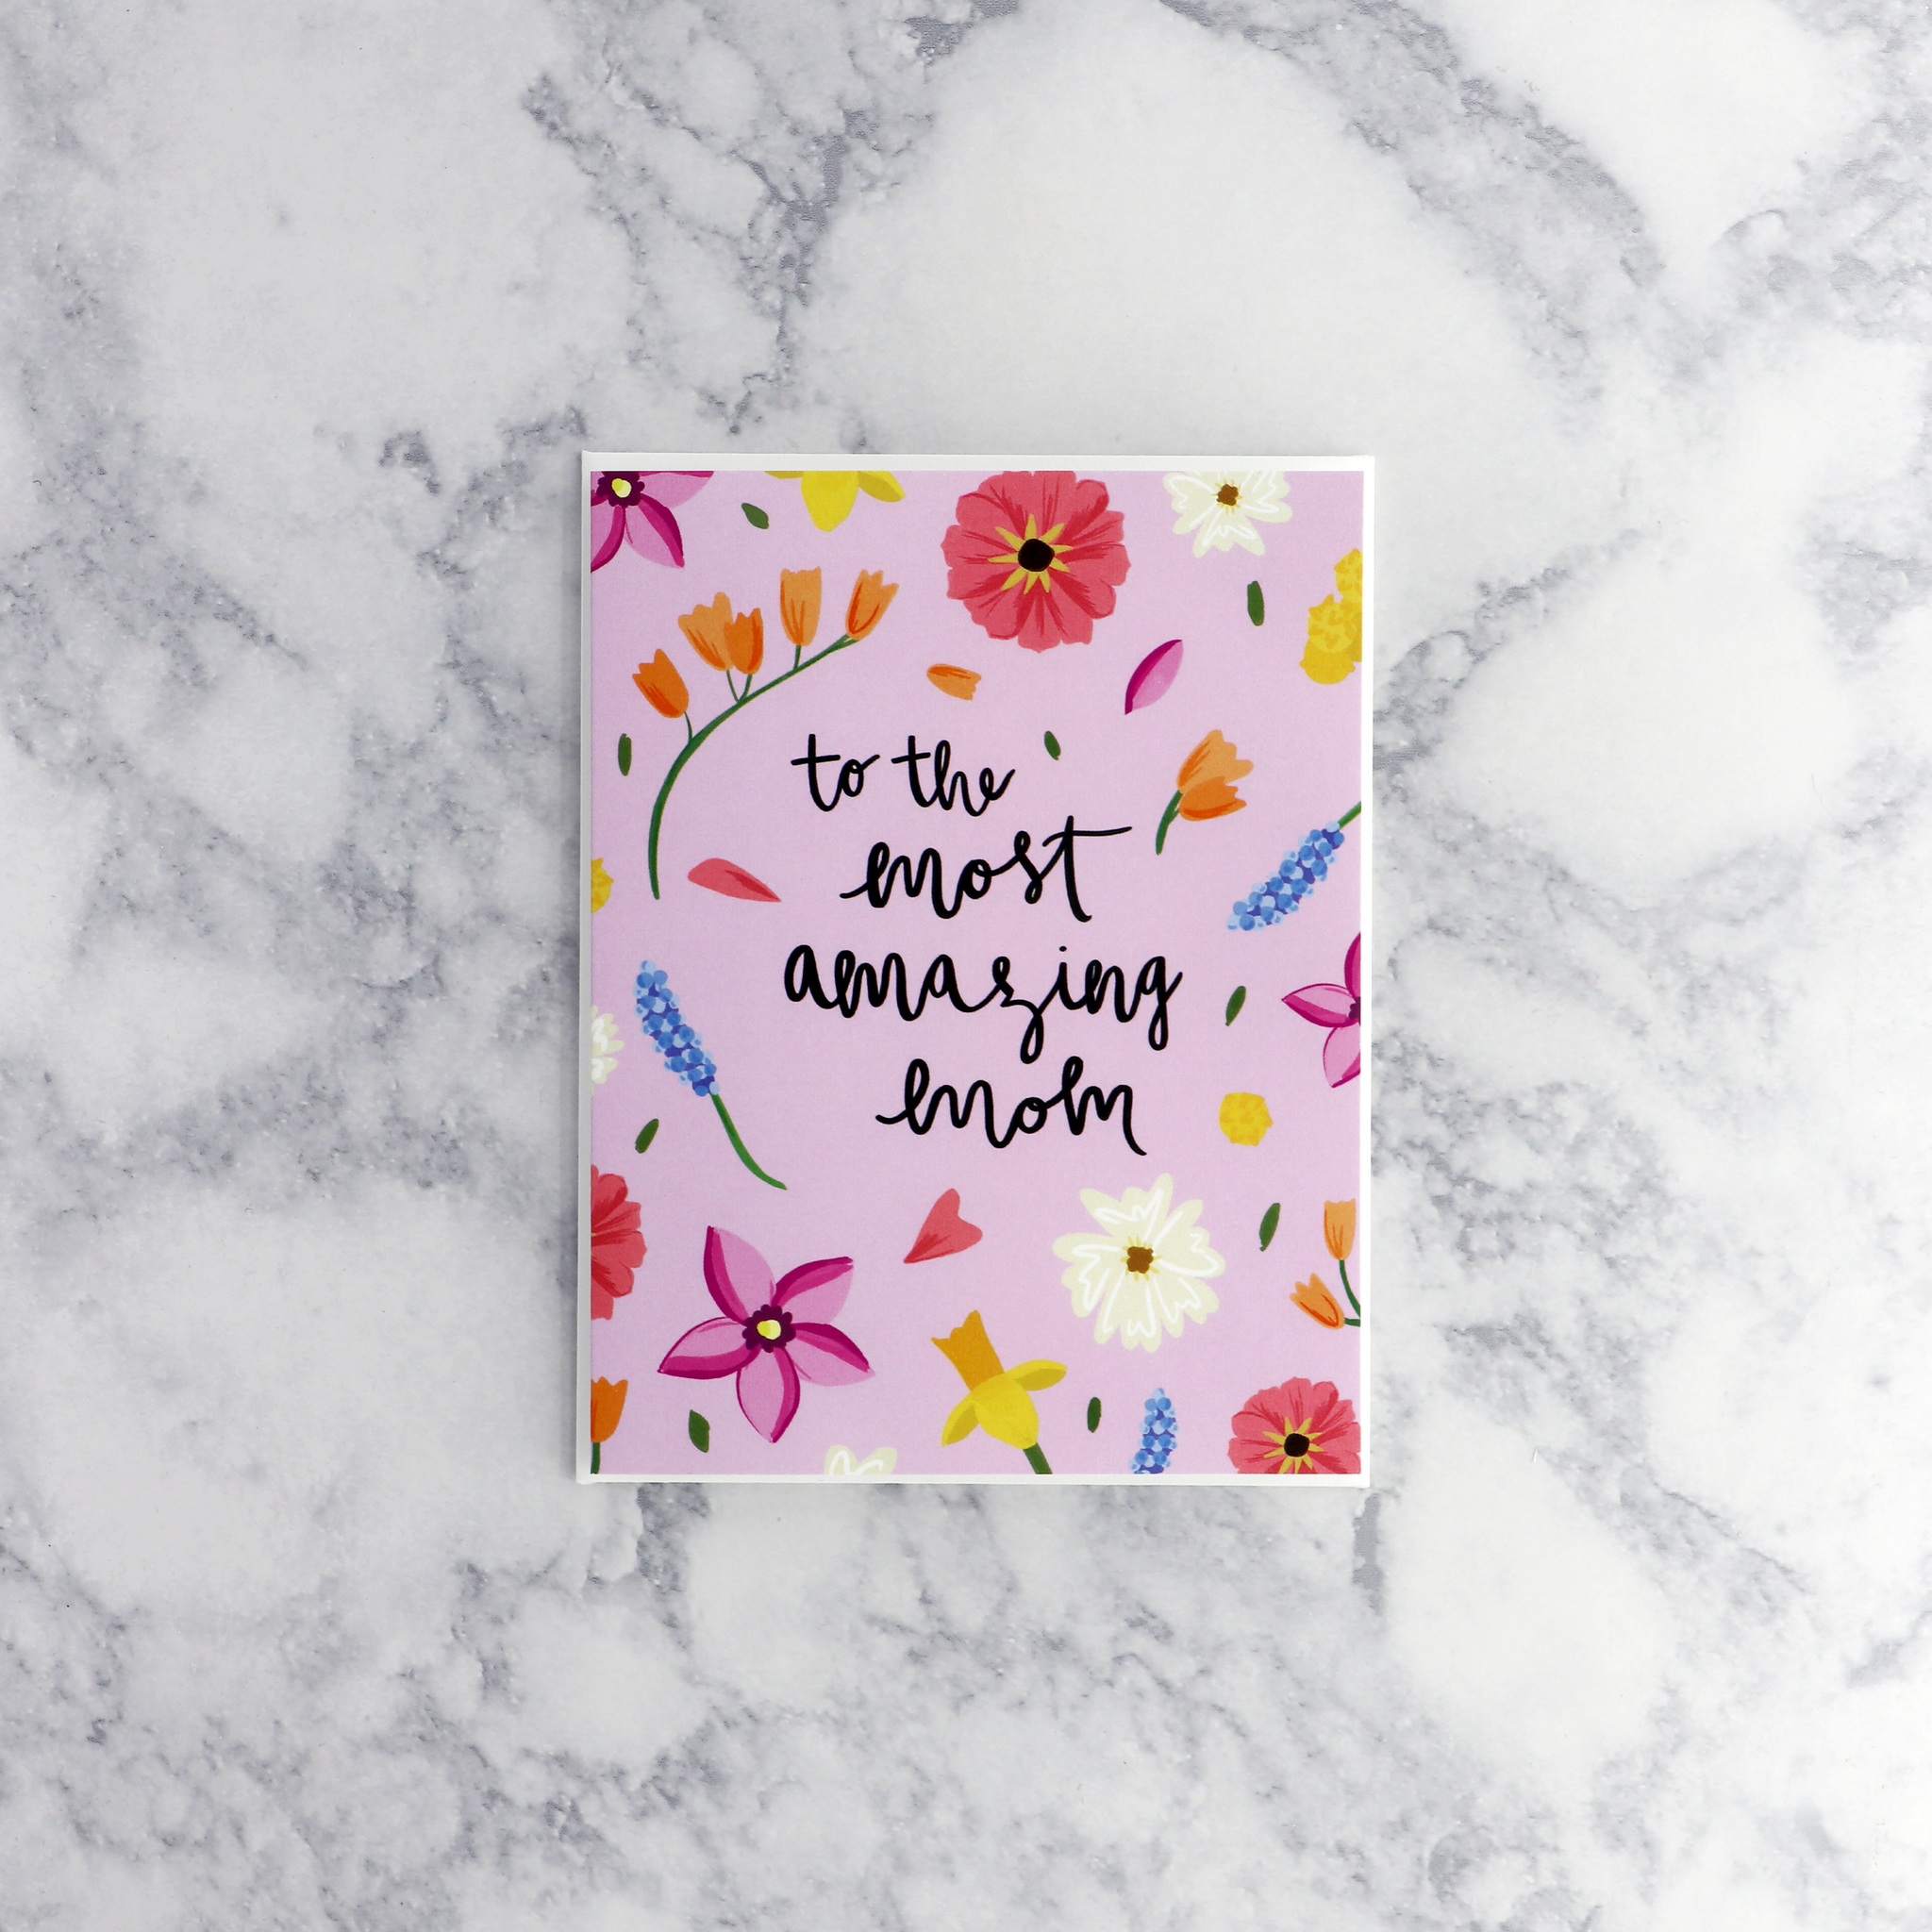 "Amazing" Mother's Day Card